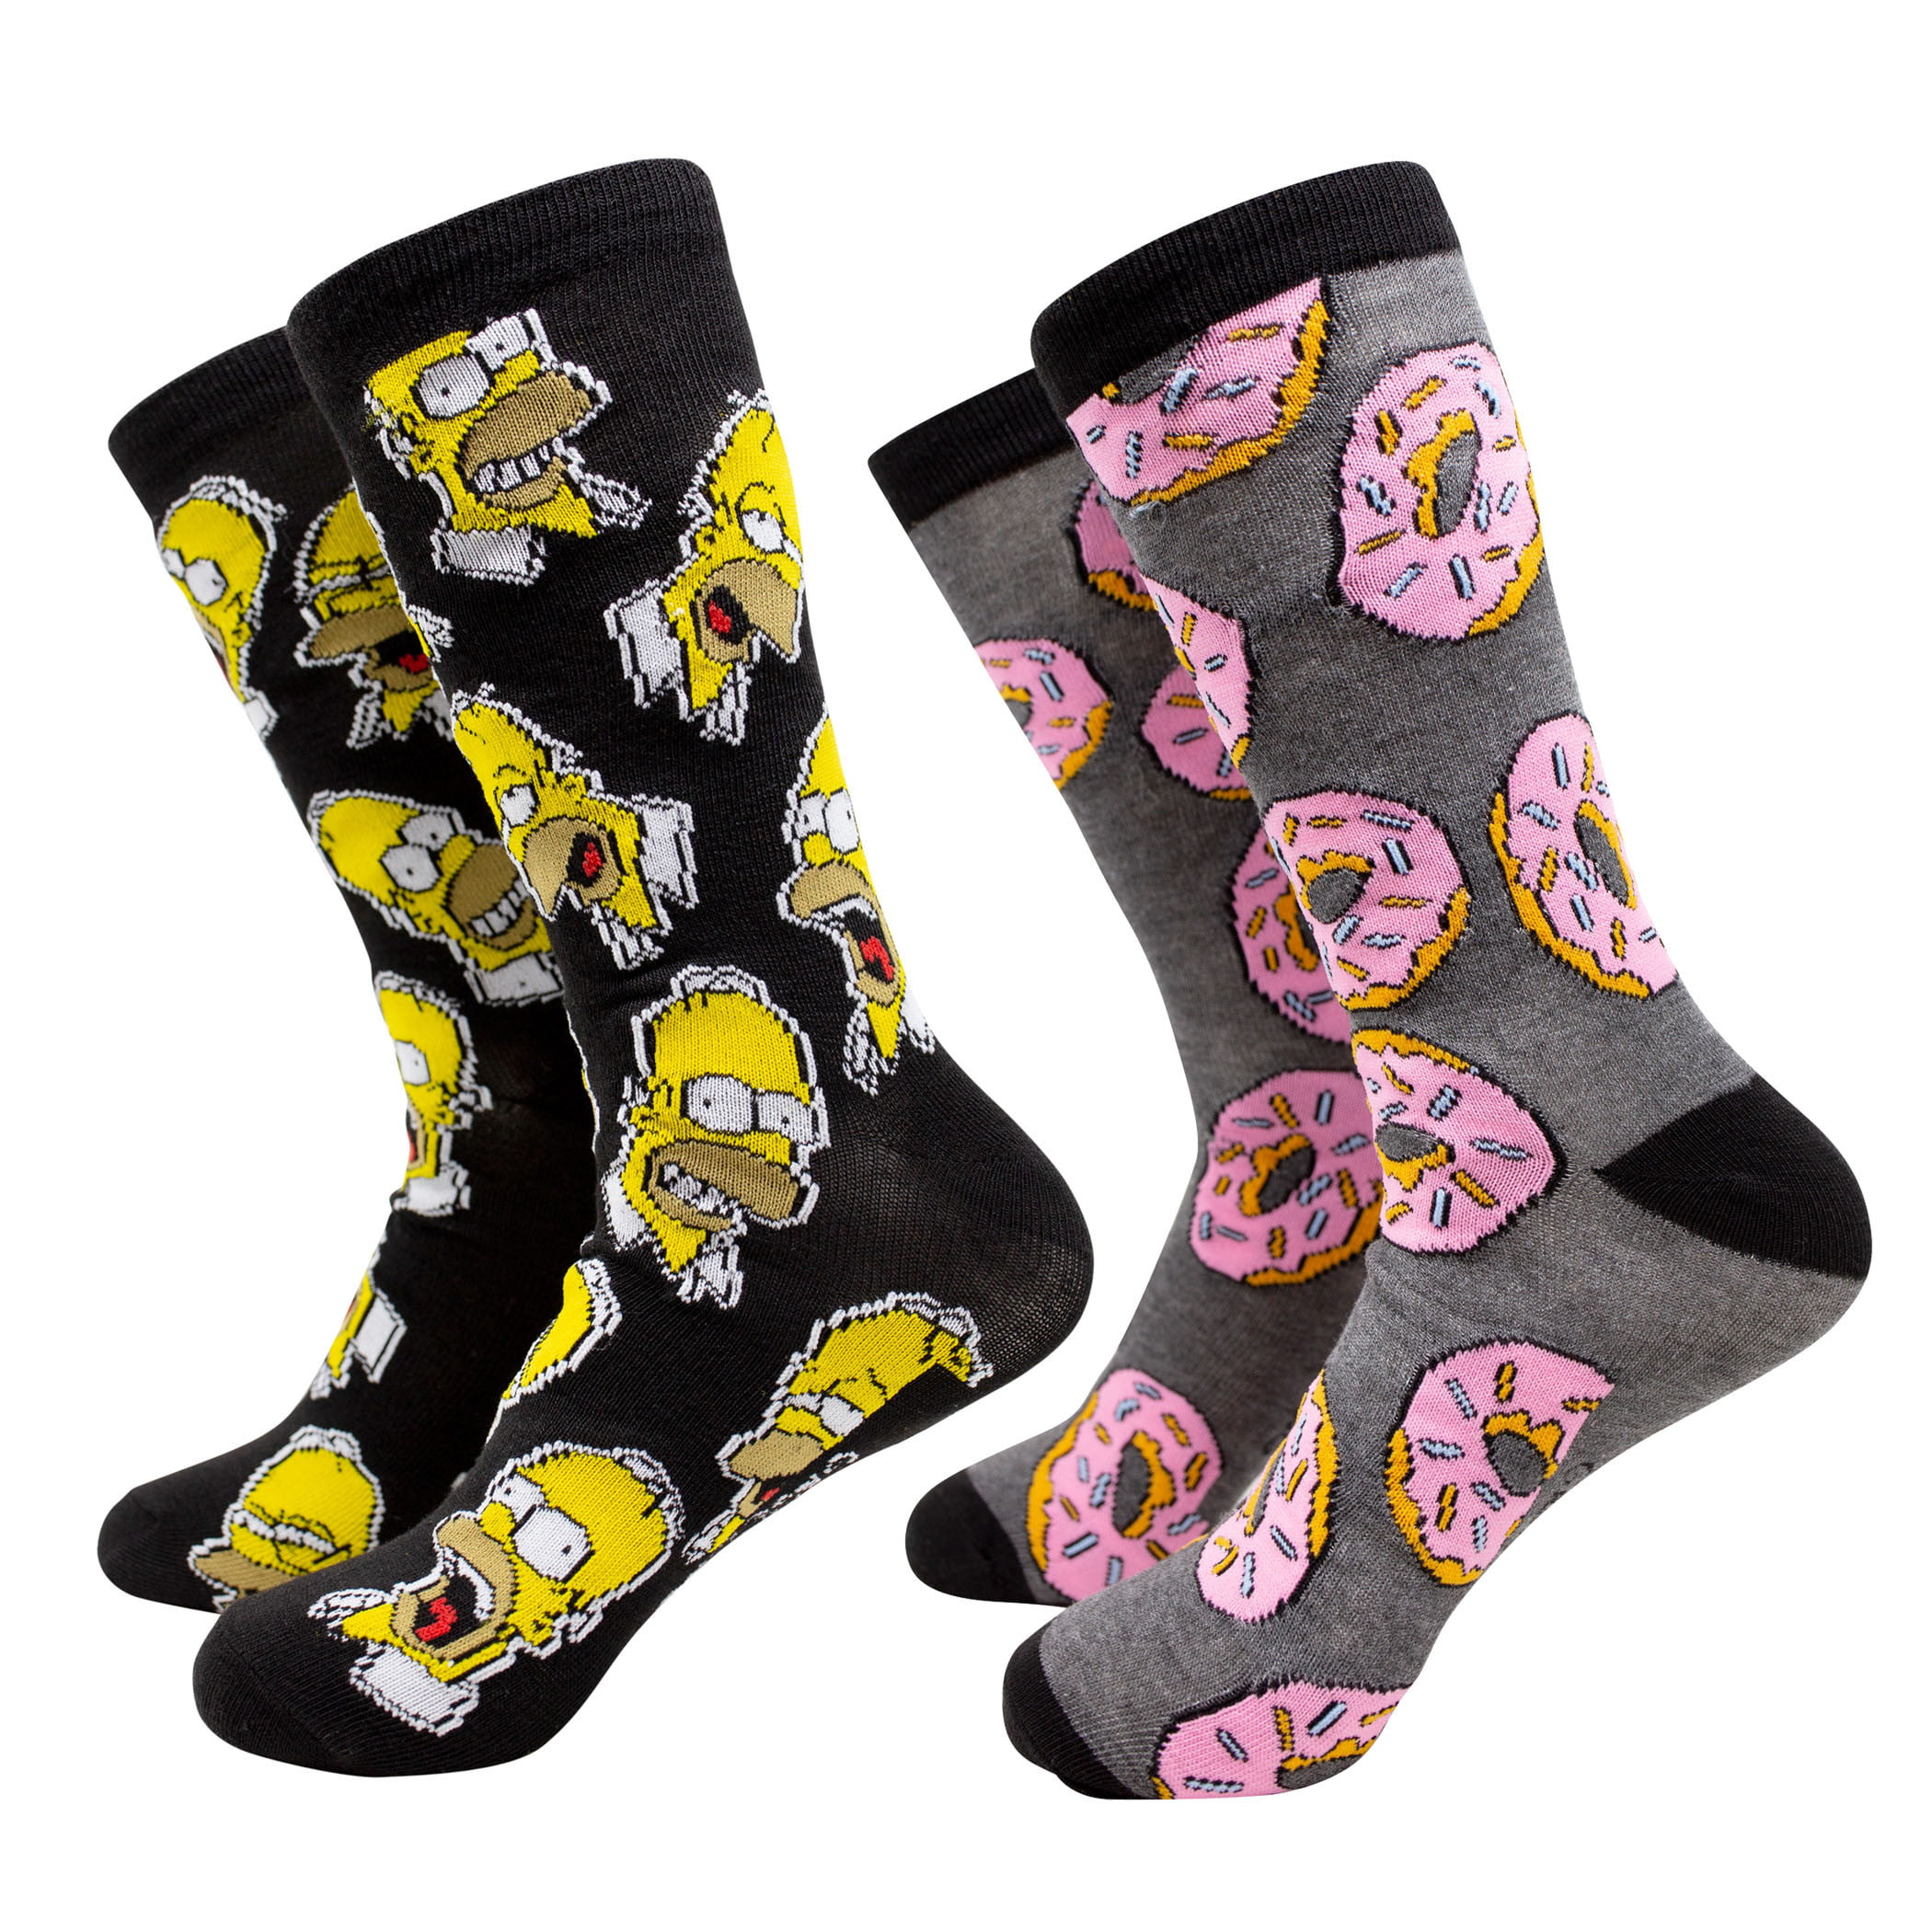 2 Pairs One Size Official The Simpsons Homer Simpson Adult Assorted Socks 